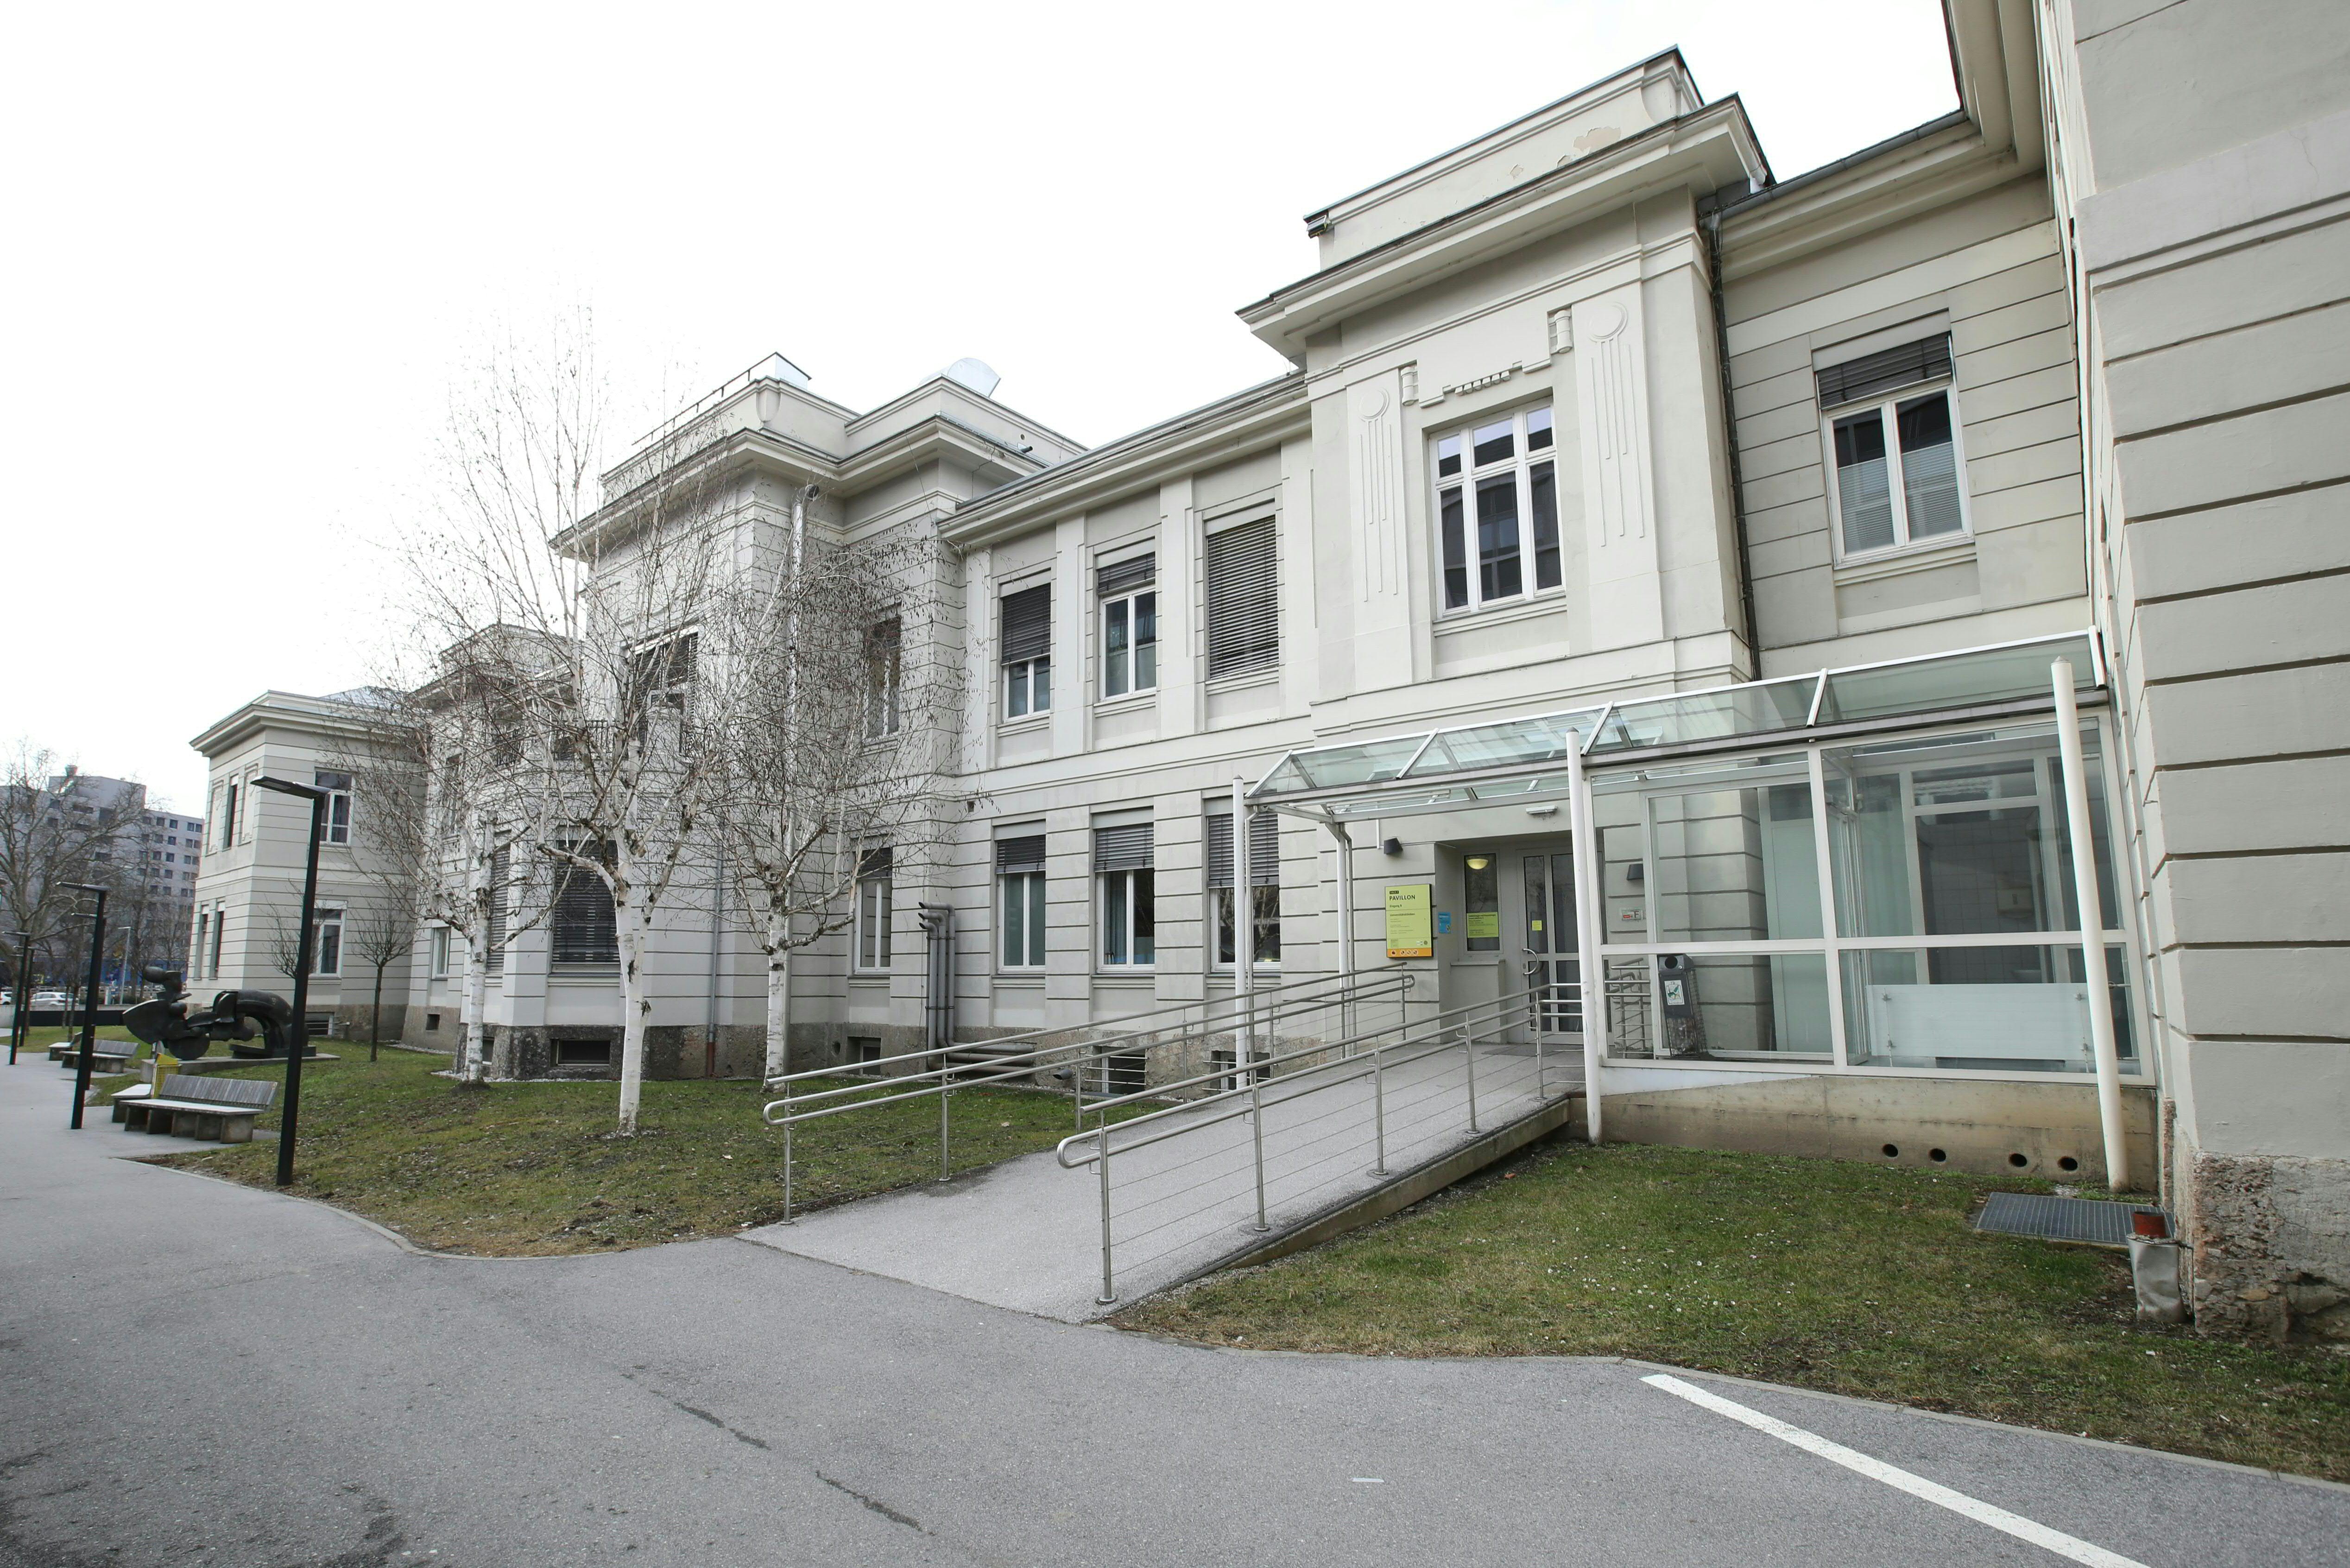 A general view of the Infectiology Department of the University Hospital in Innsbruck, Austria on Tuesday, February 25, as two people are currently in isolation after being confirmed infected with the coronavirus.